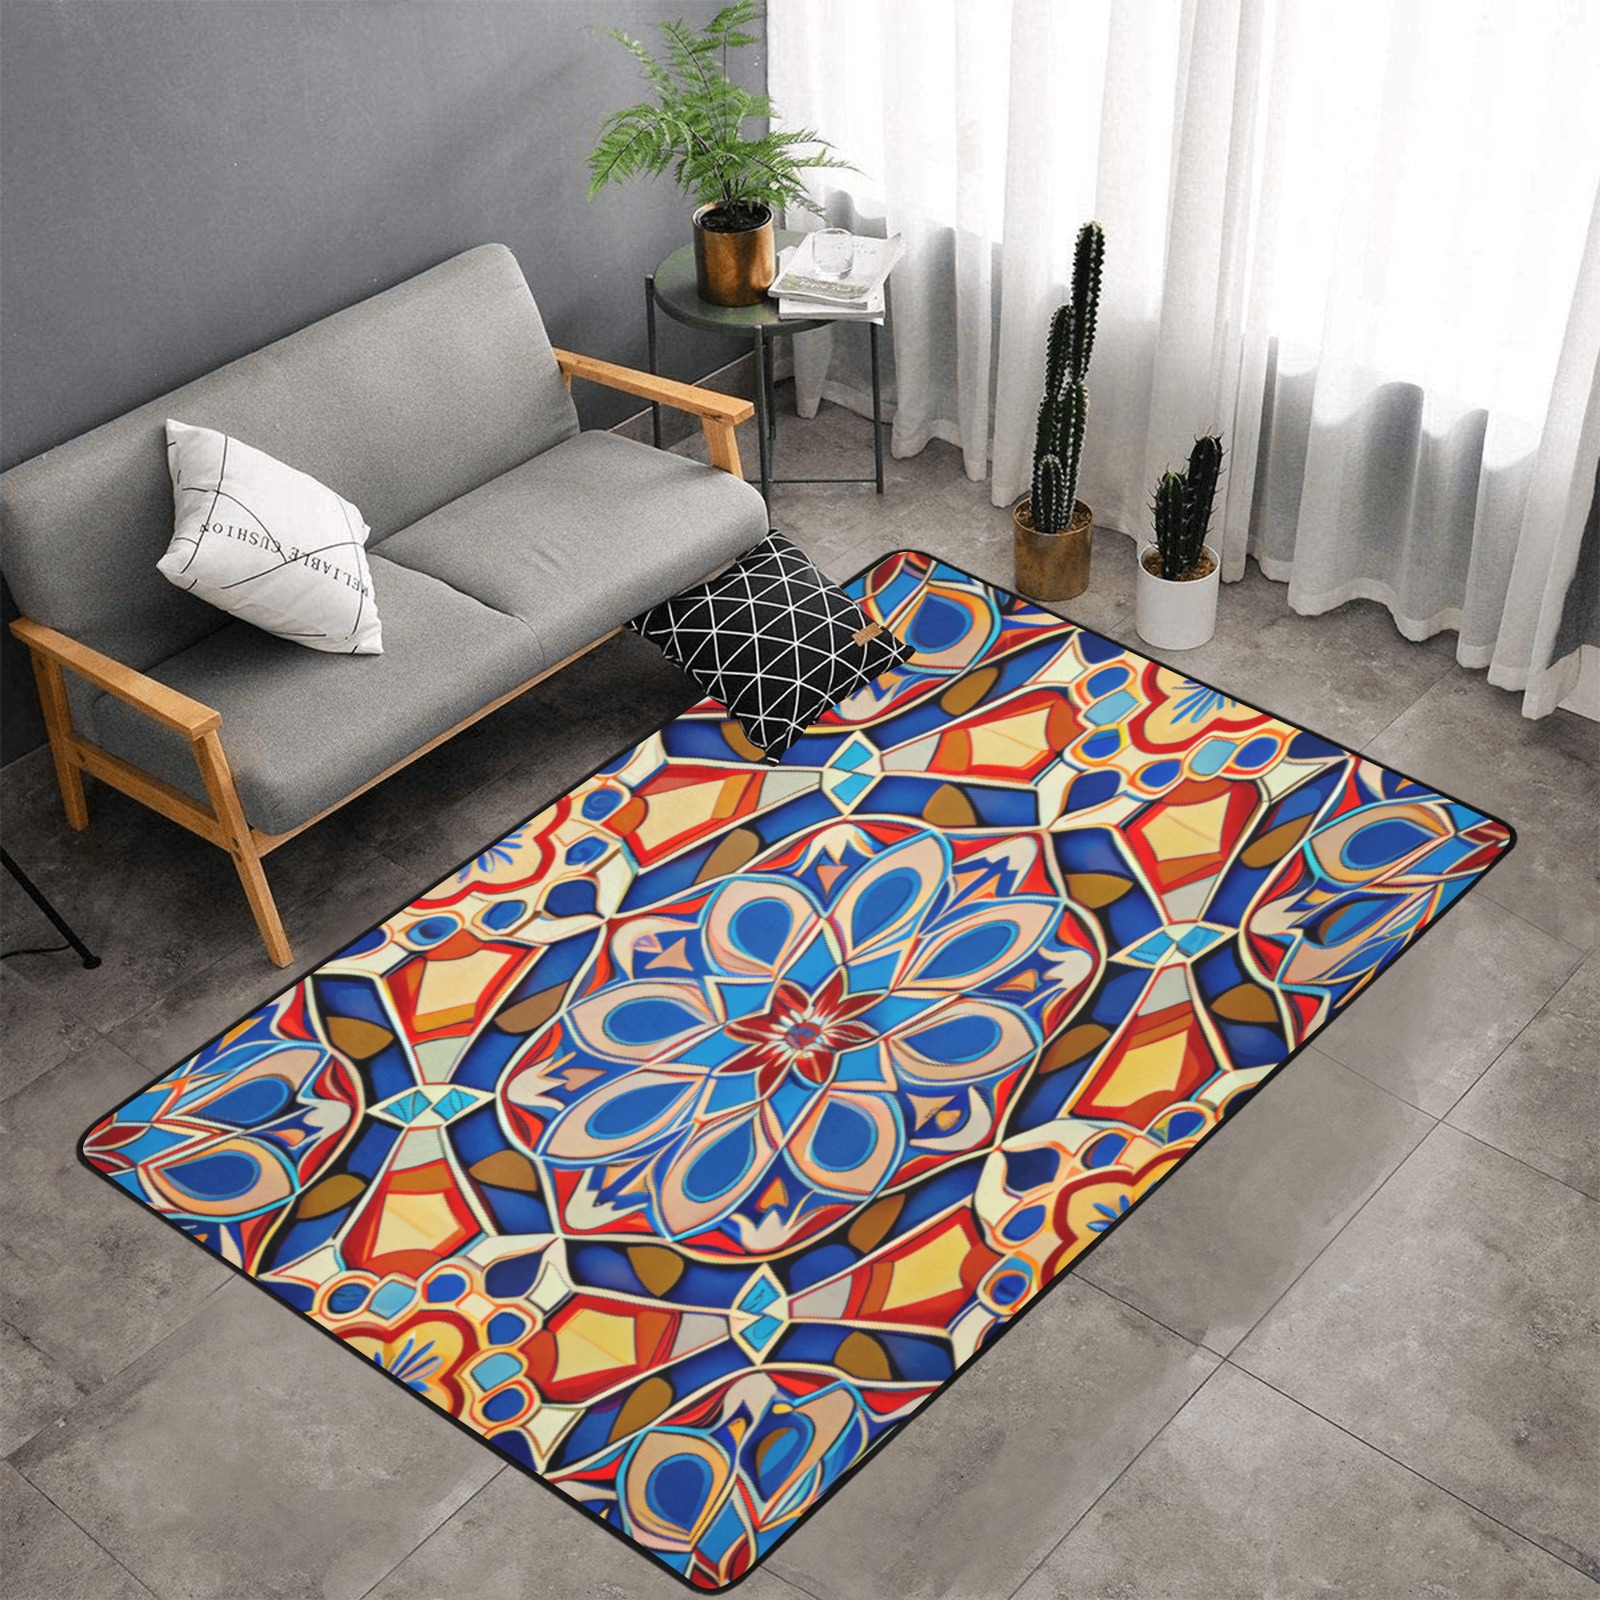 intricate pattern, orange, blue and yellow Area Rug with Black Binding 7'x5'